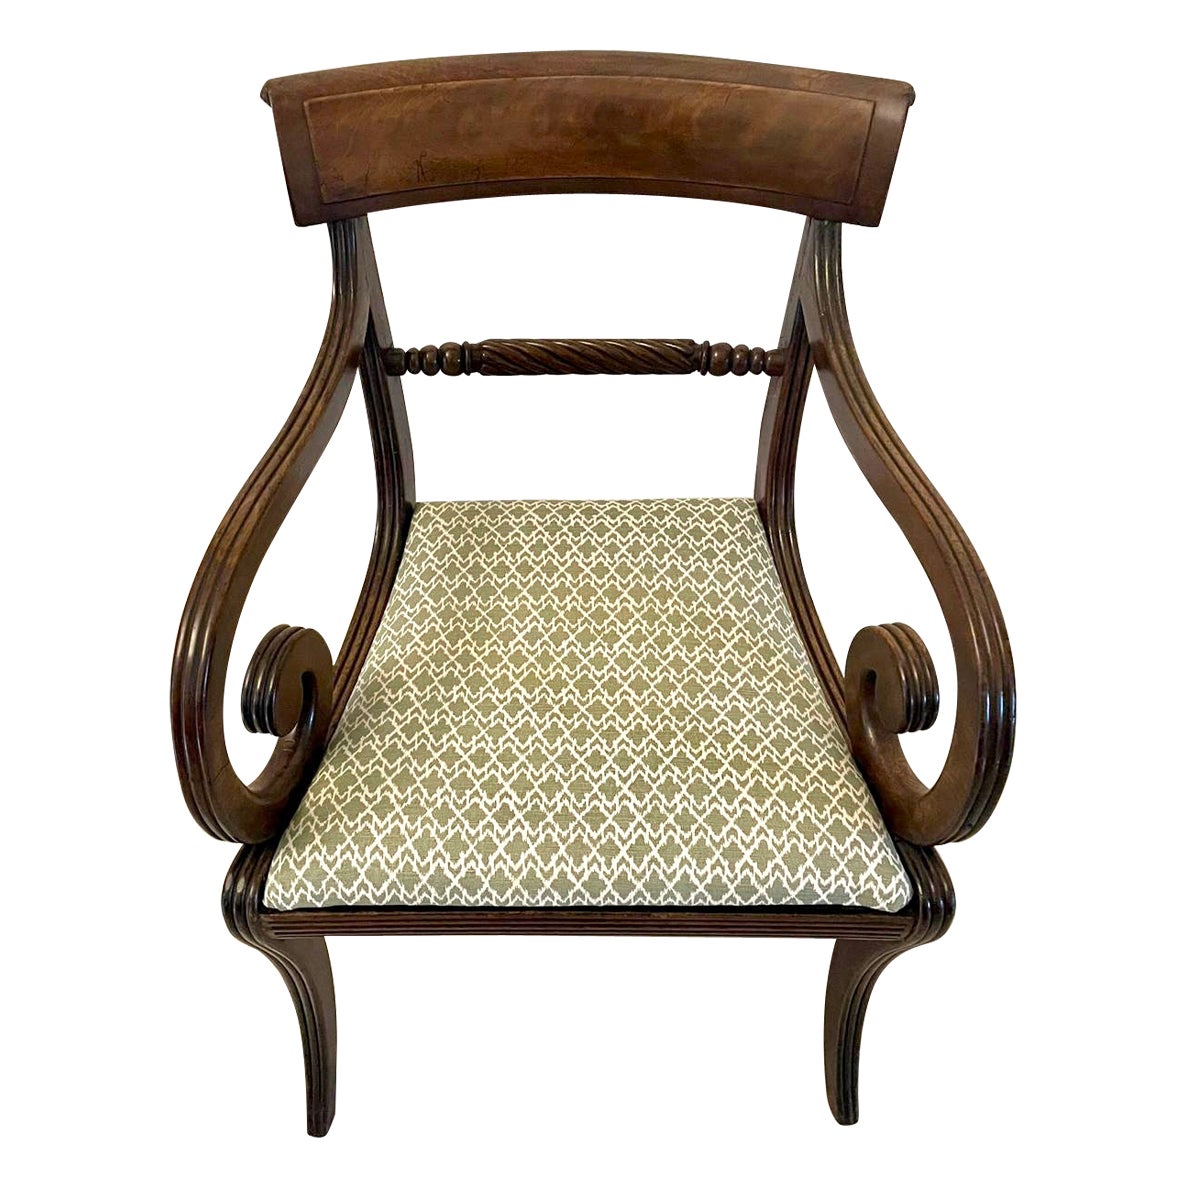 Quality antique regency mahogany desk chair having a quality shaped figured mahogany back with a rope twist turned centre rail, lovely shaped scrolled open arms, newly reupholstered drop in seat in a quality fabric, reeded frieze and standing on